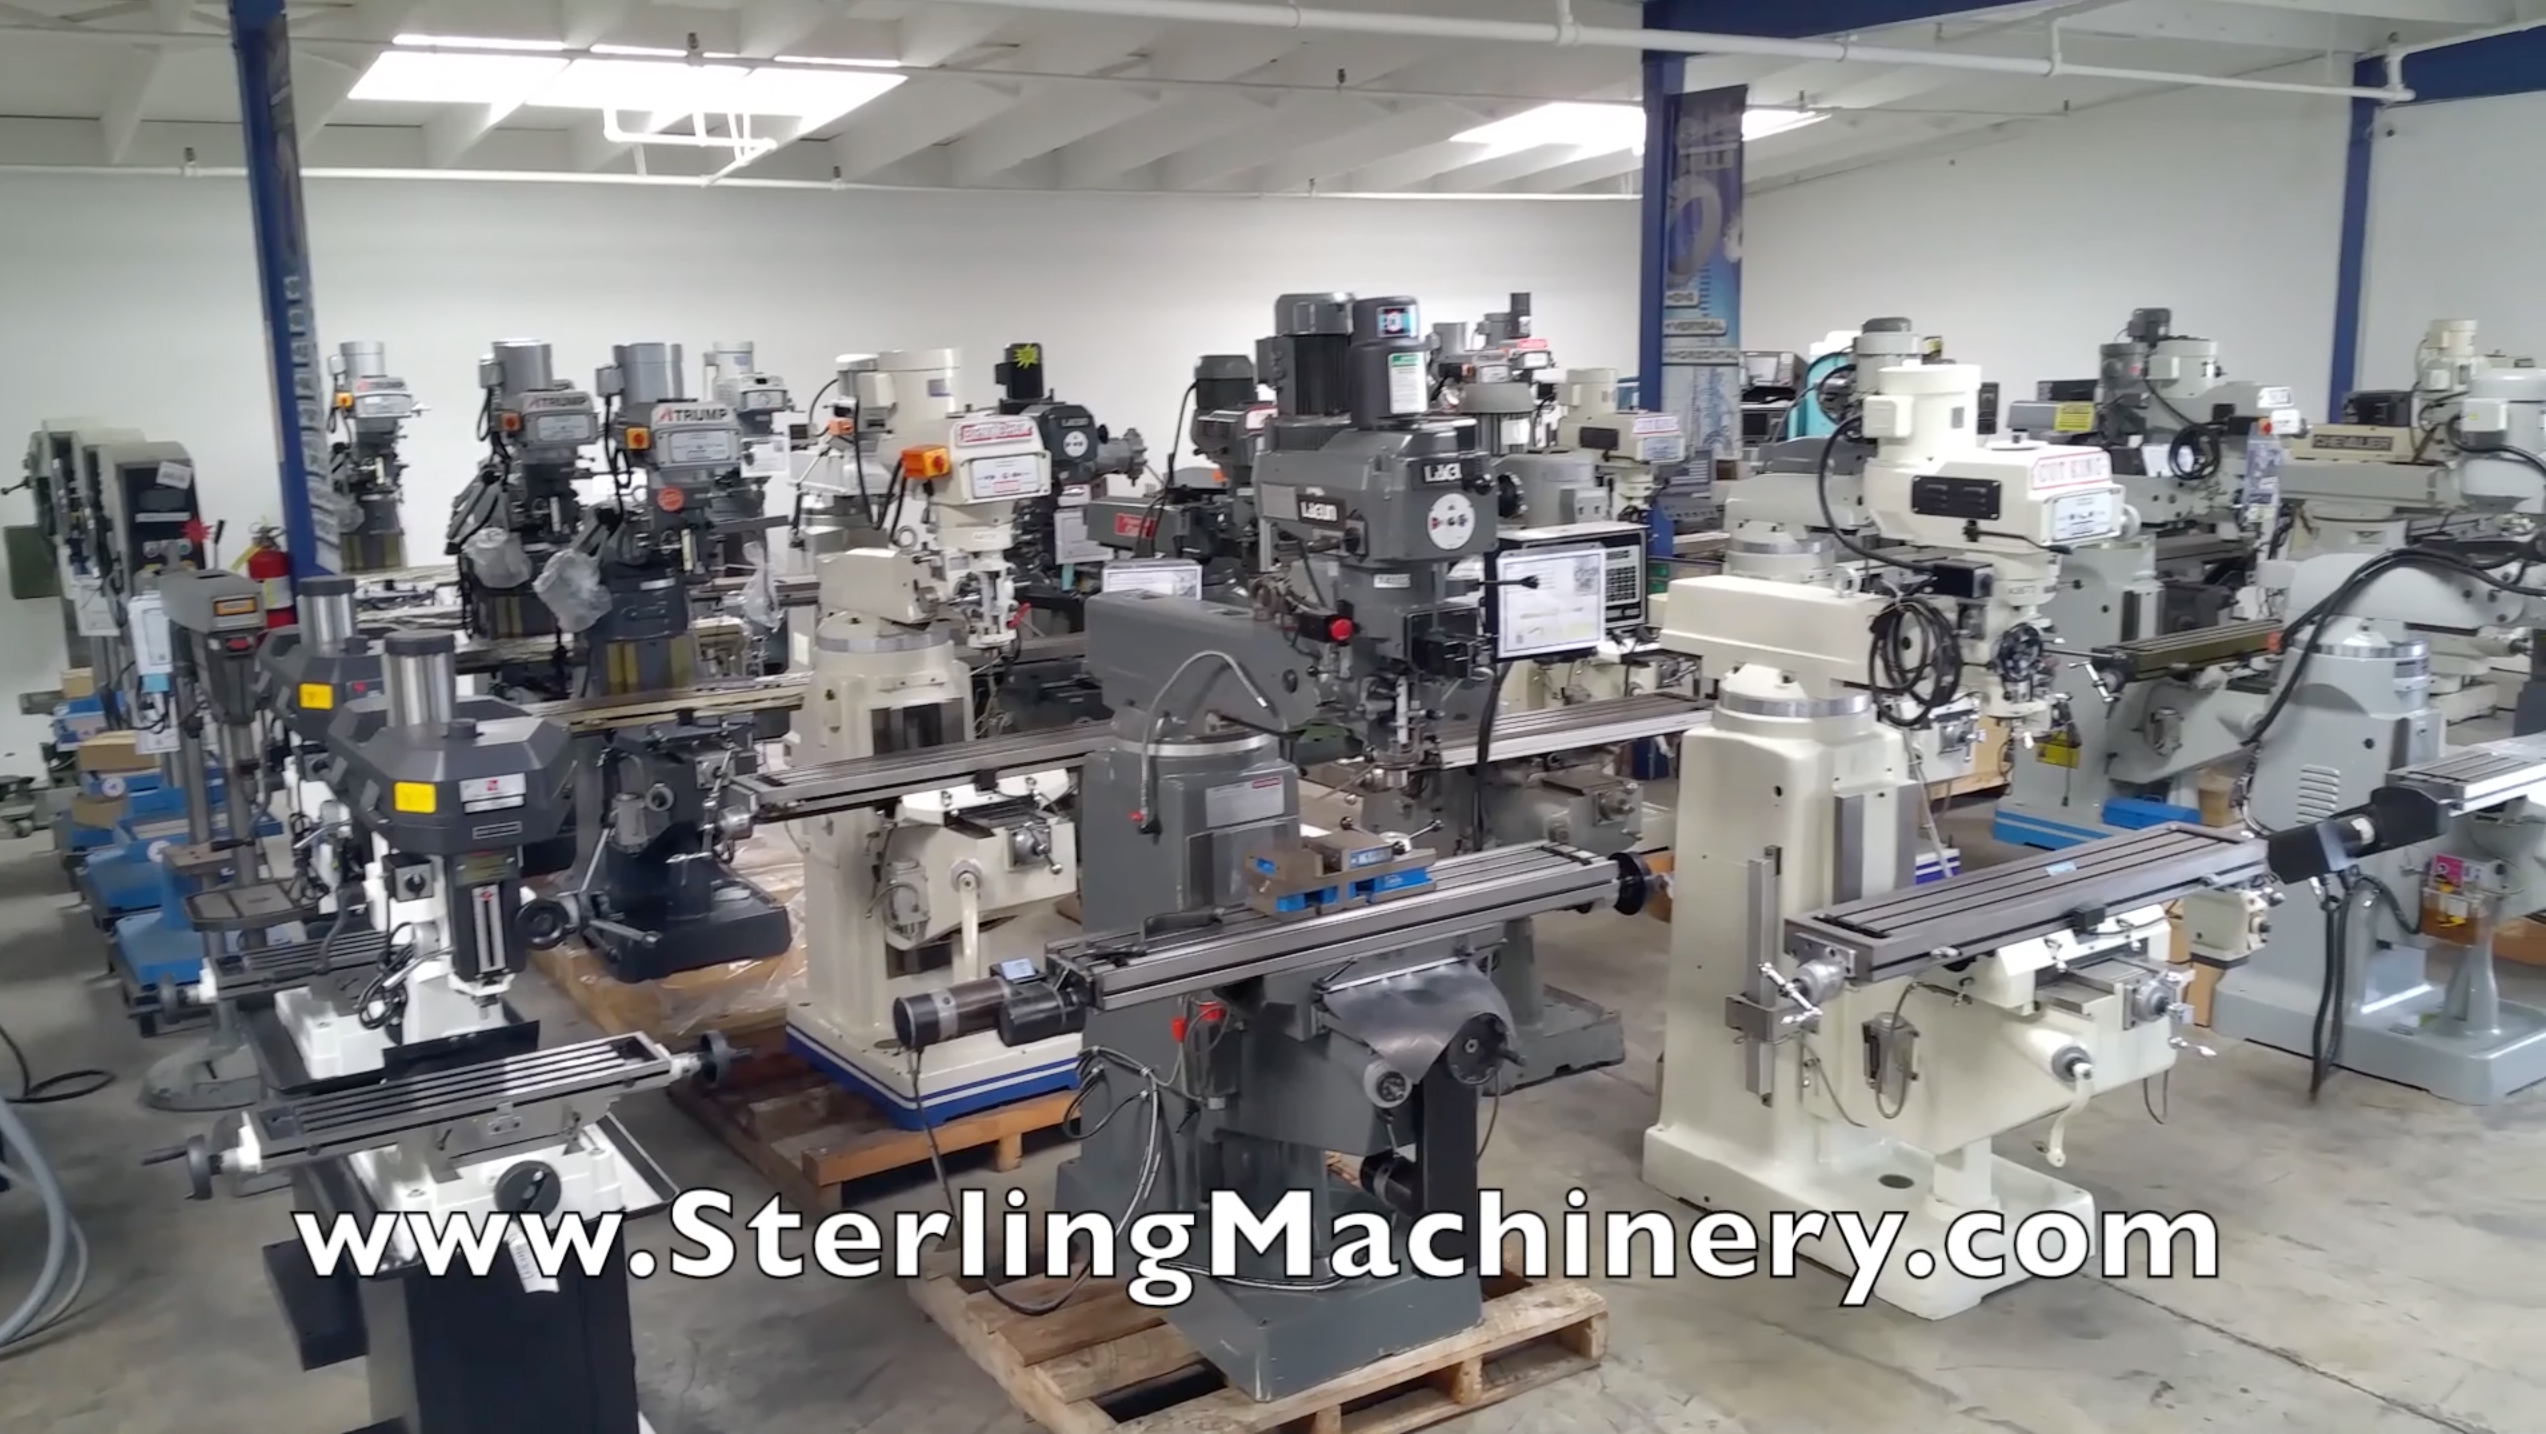 New and Used Sterling Machinery Exchange Company | Machinery tube